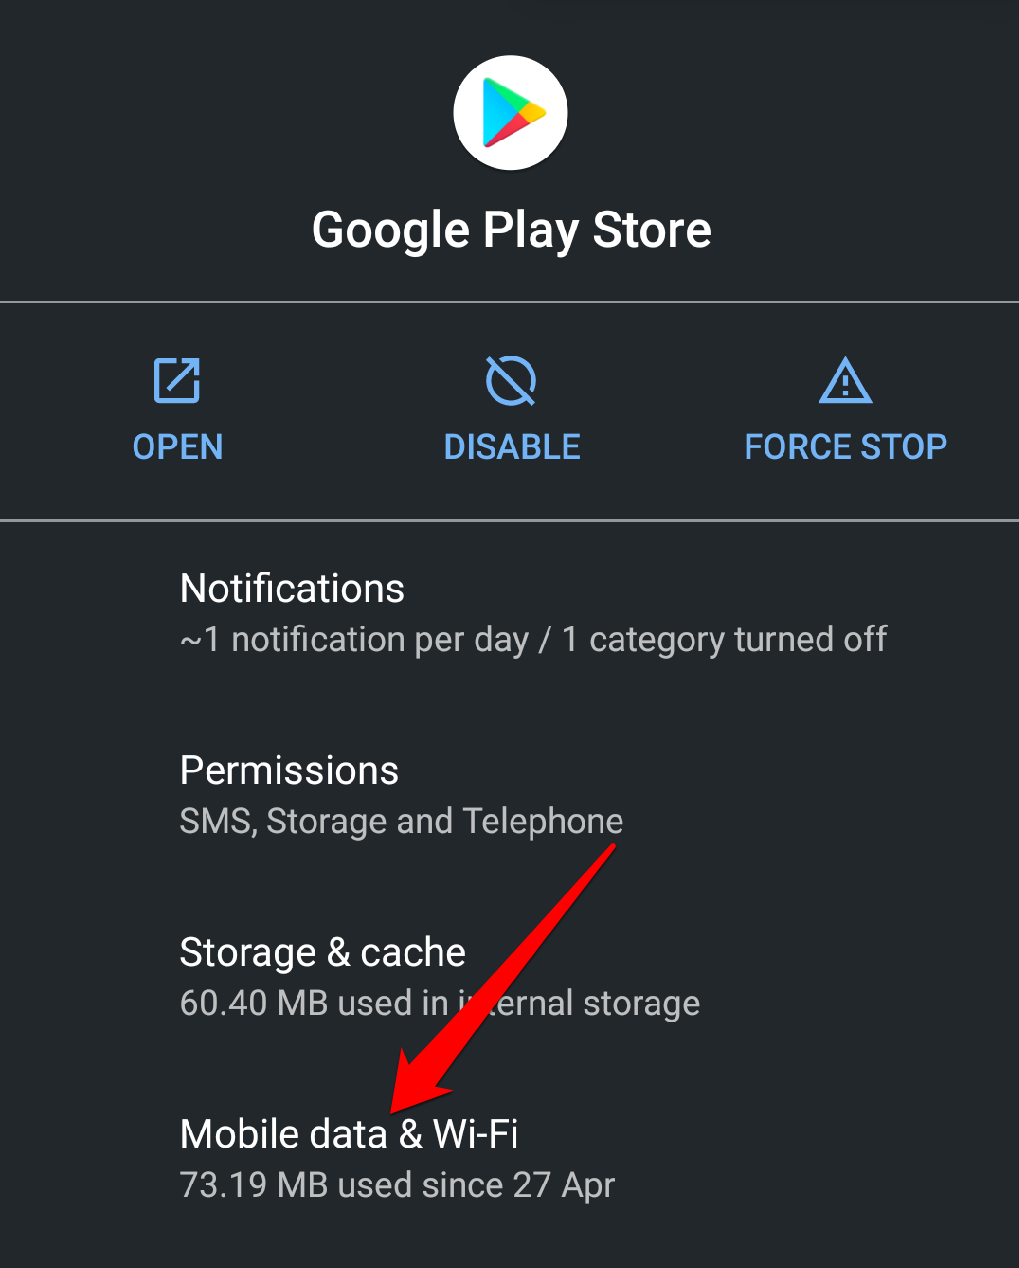 Cant download game even with enough space - Google Play Community